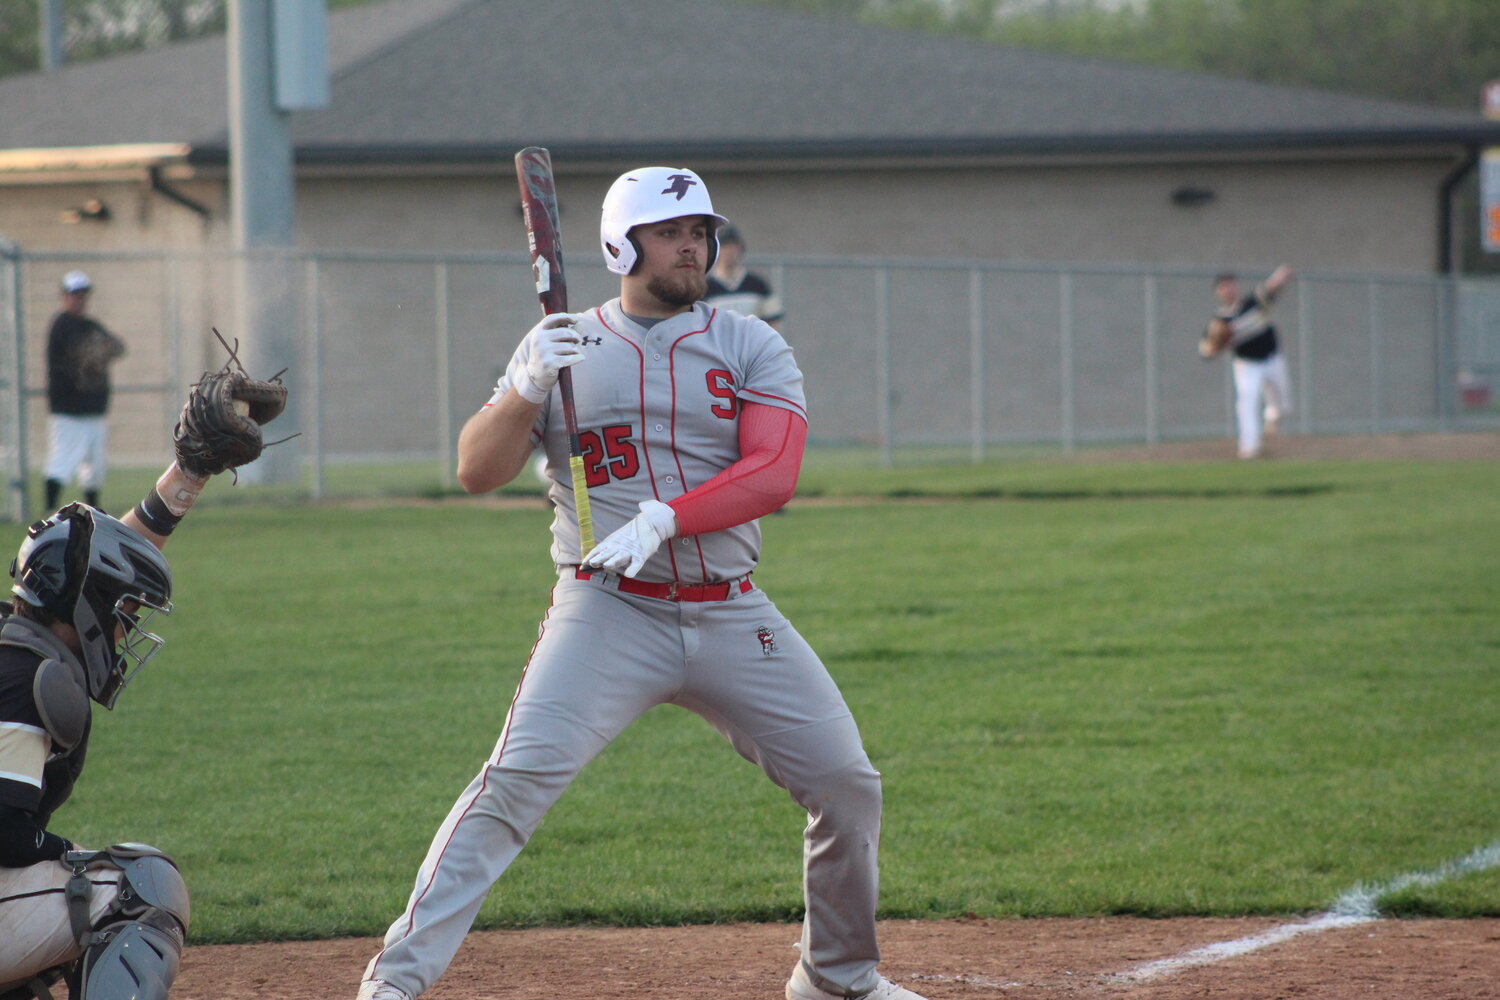 Senior slugger Mason Hall moves out of the way of a pitch that was high and inside.